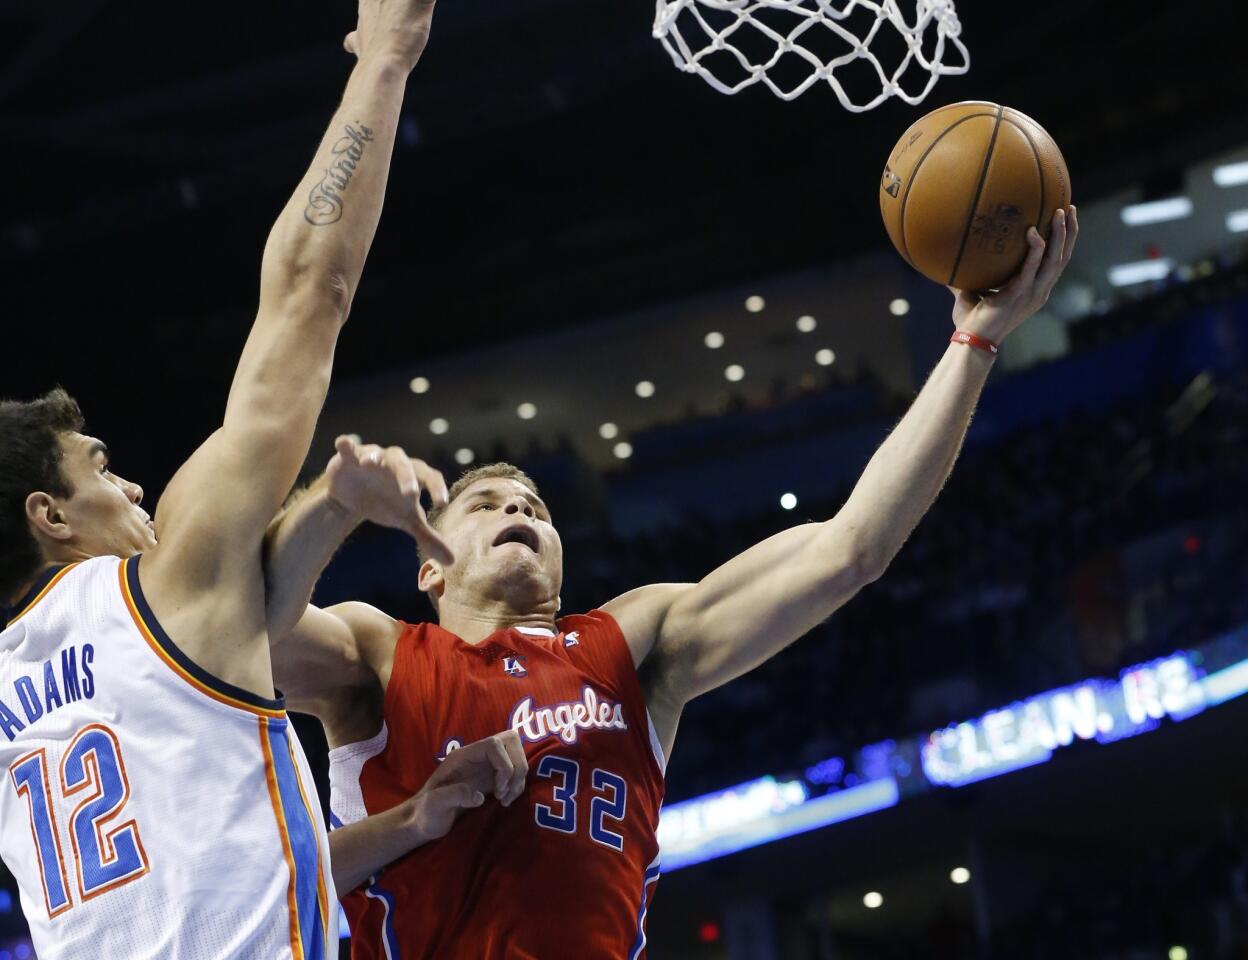 Clippers power forward Blake Griffin drives to the basket against Thunder center Steven Adams in the first half.